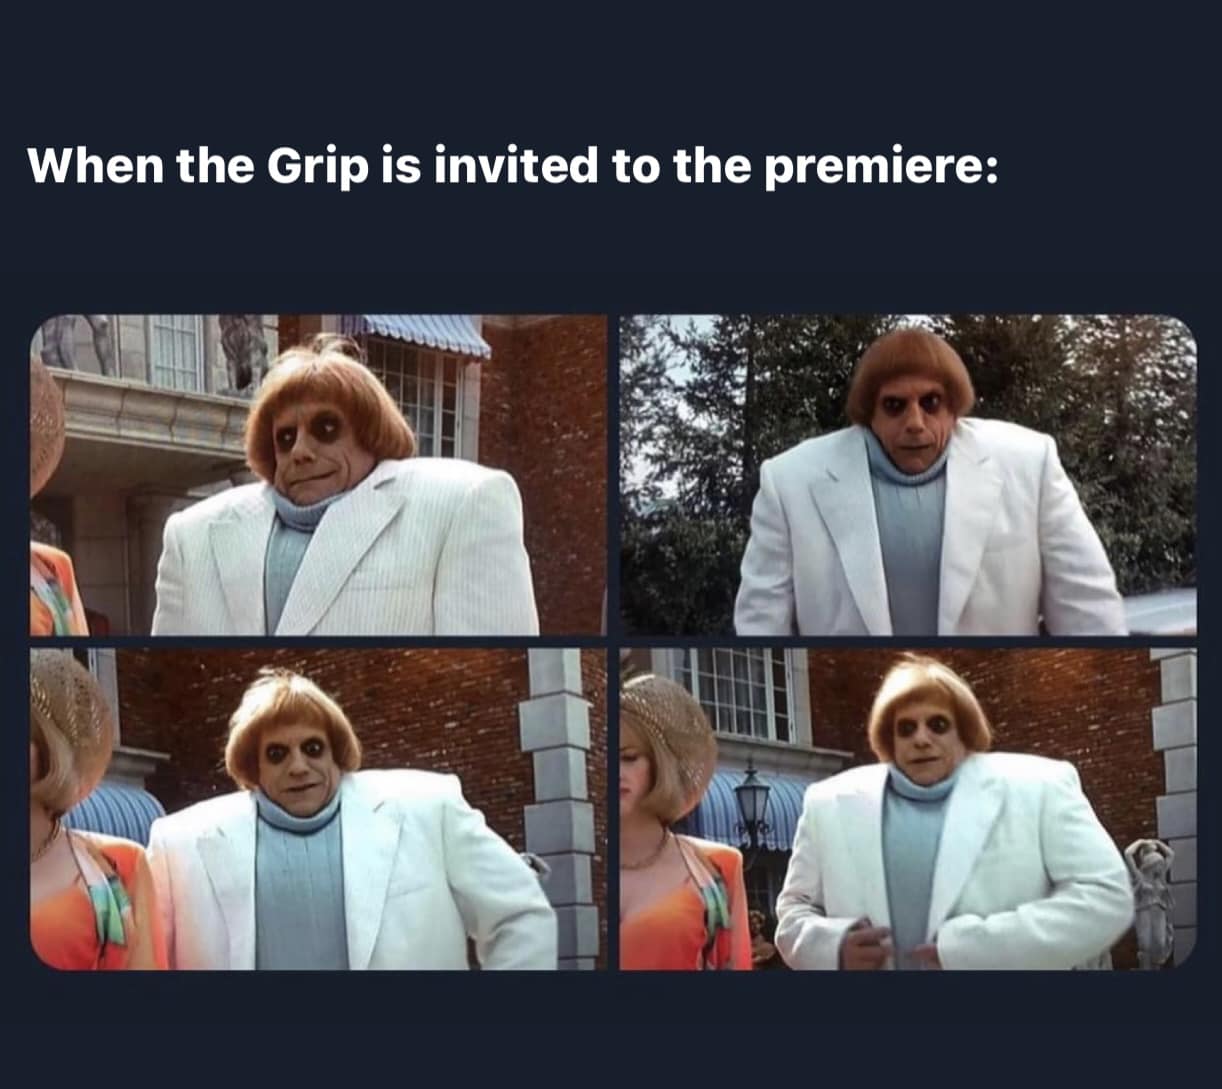 Uncle Fester Addams in a white suit representing the grip crew at the premiere